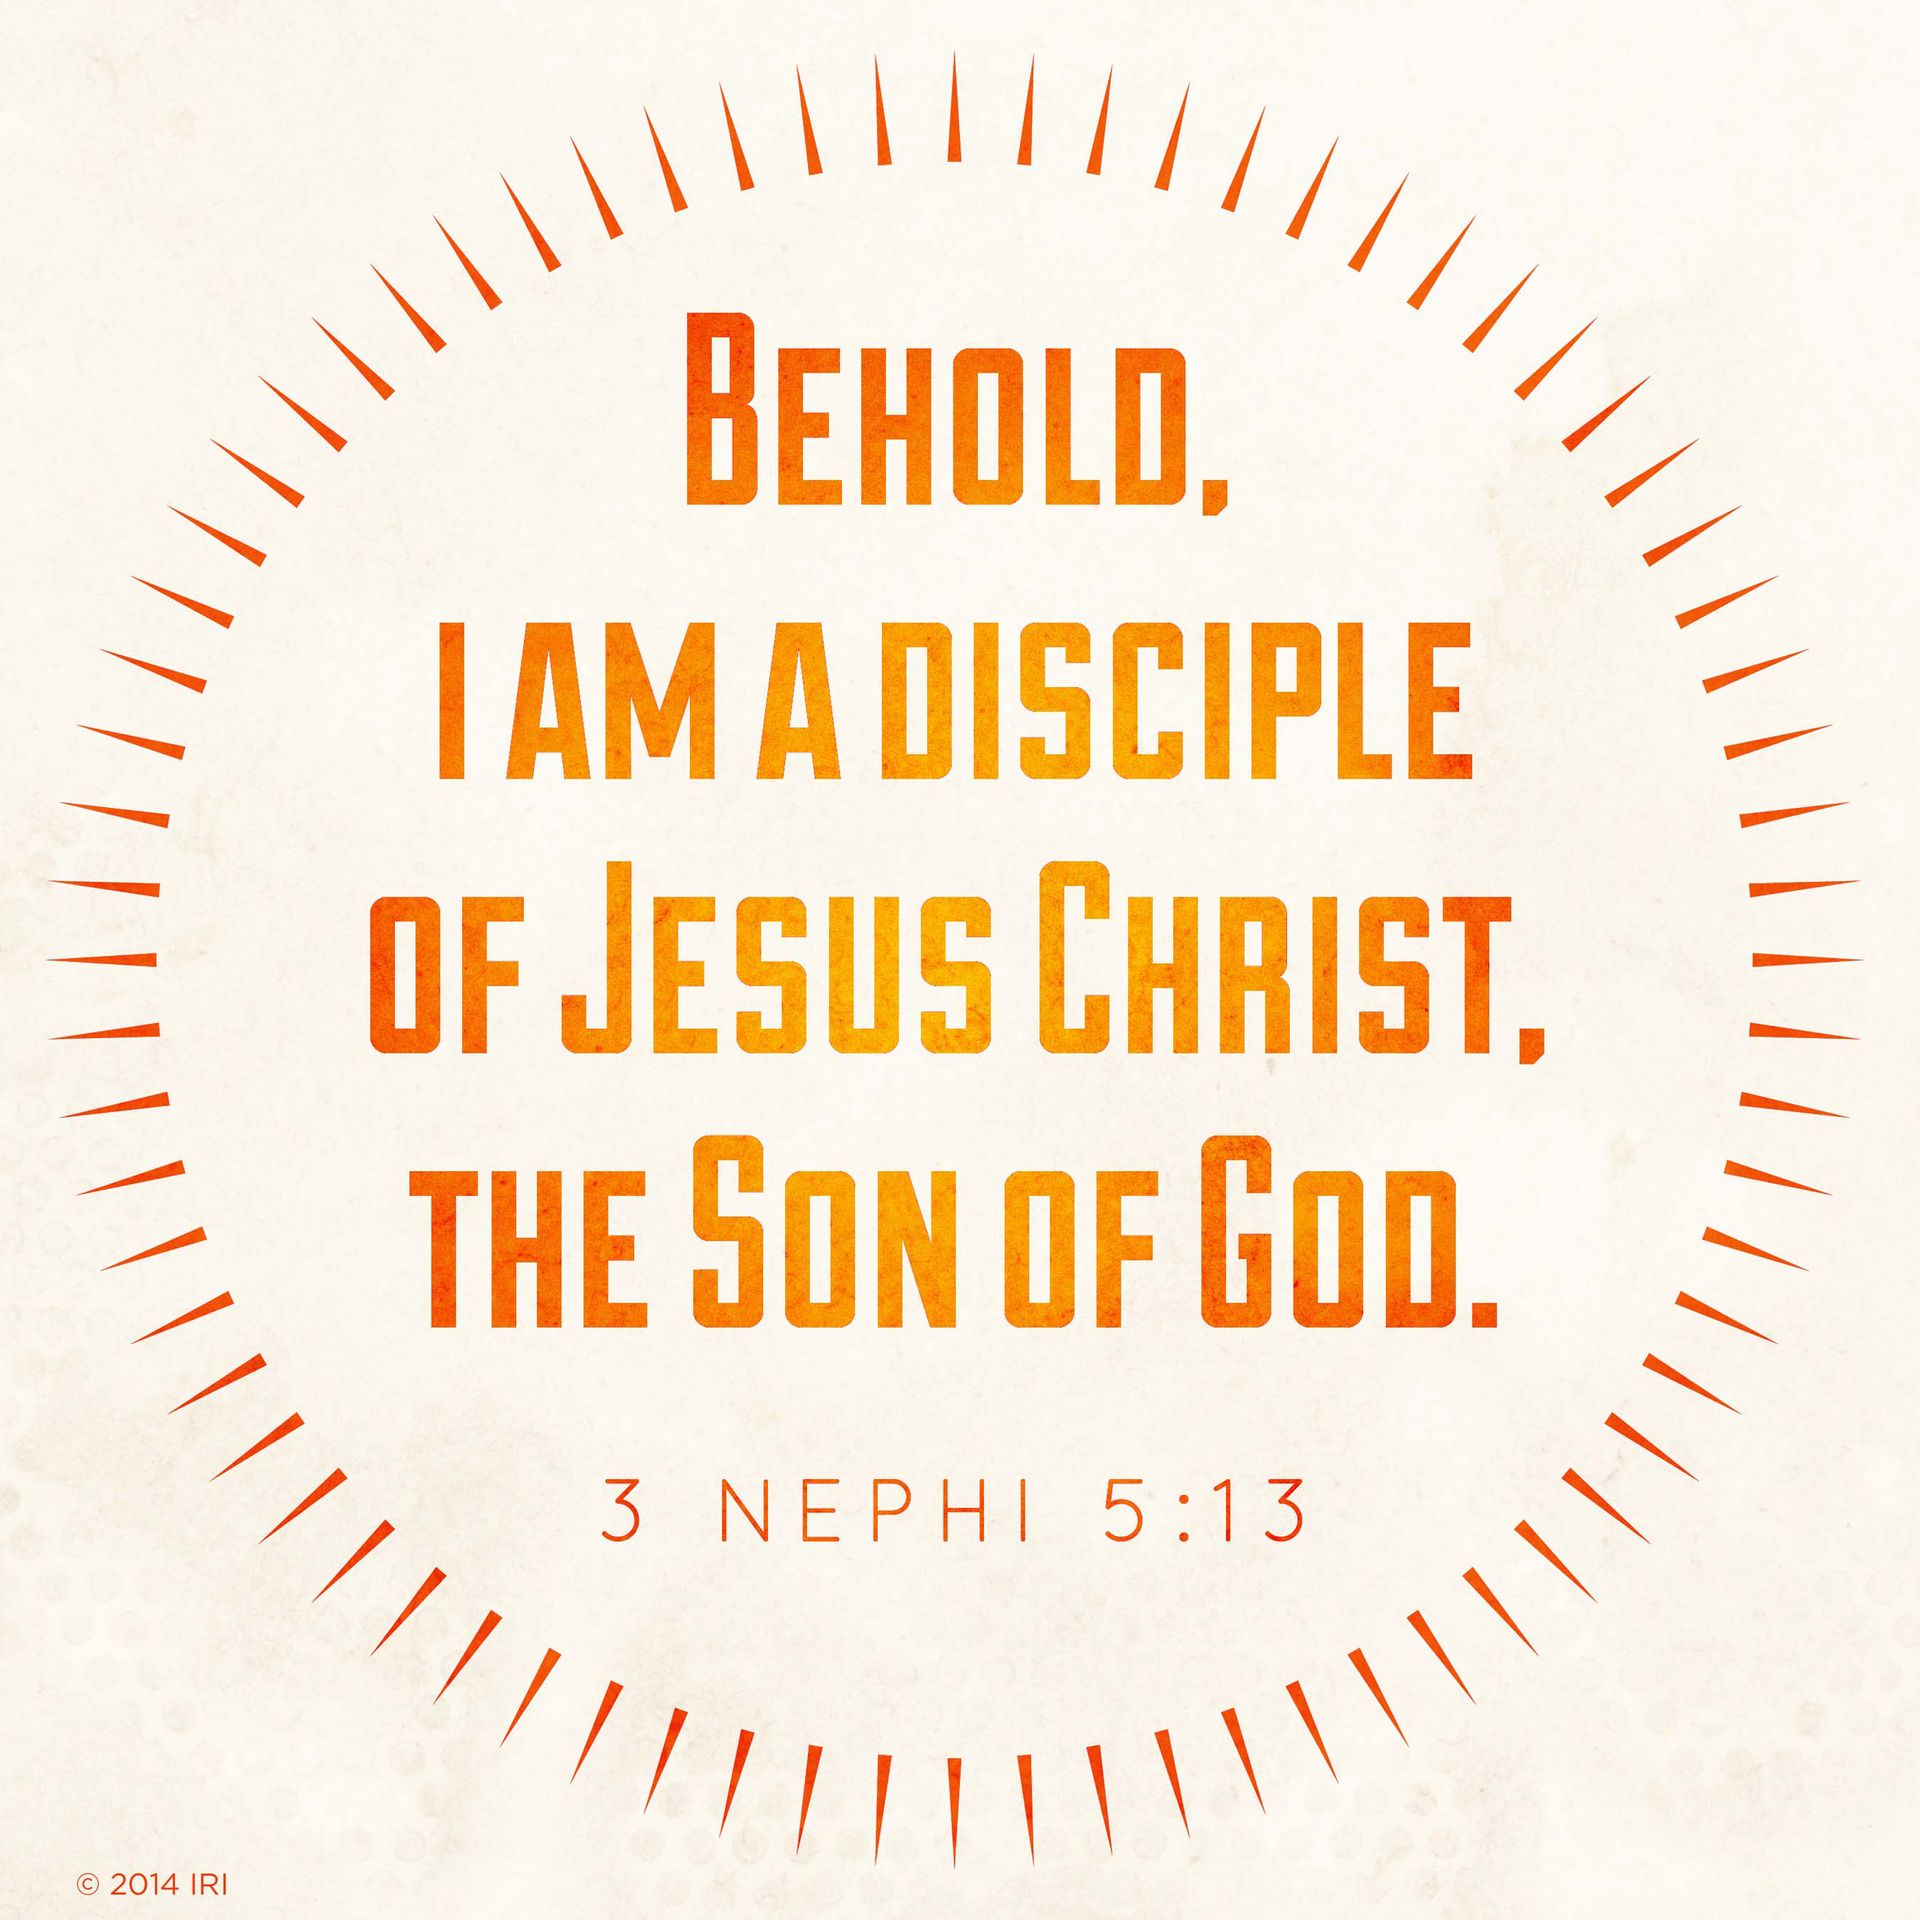 “Behold, I am a disciple of Jesus Christ, the Son of God.”—3 Nephi 5:13